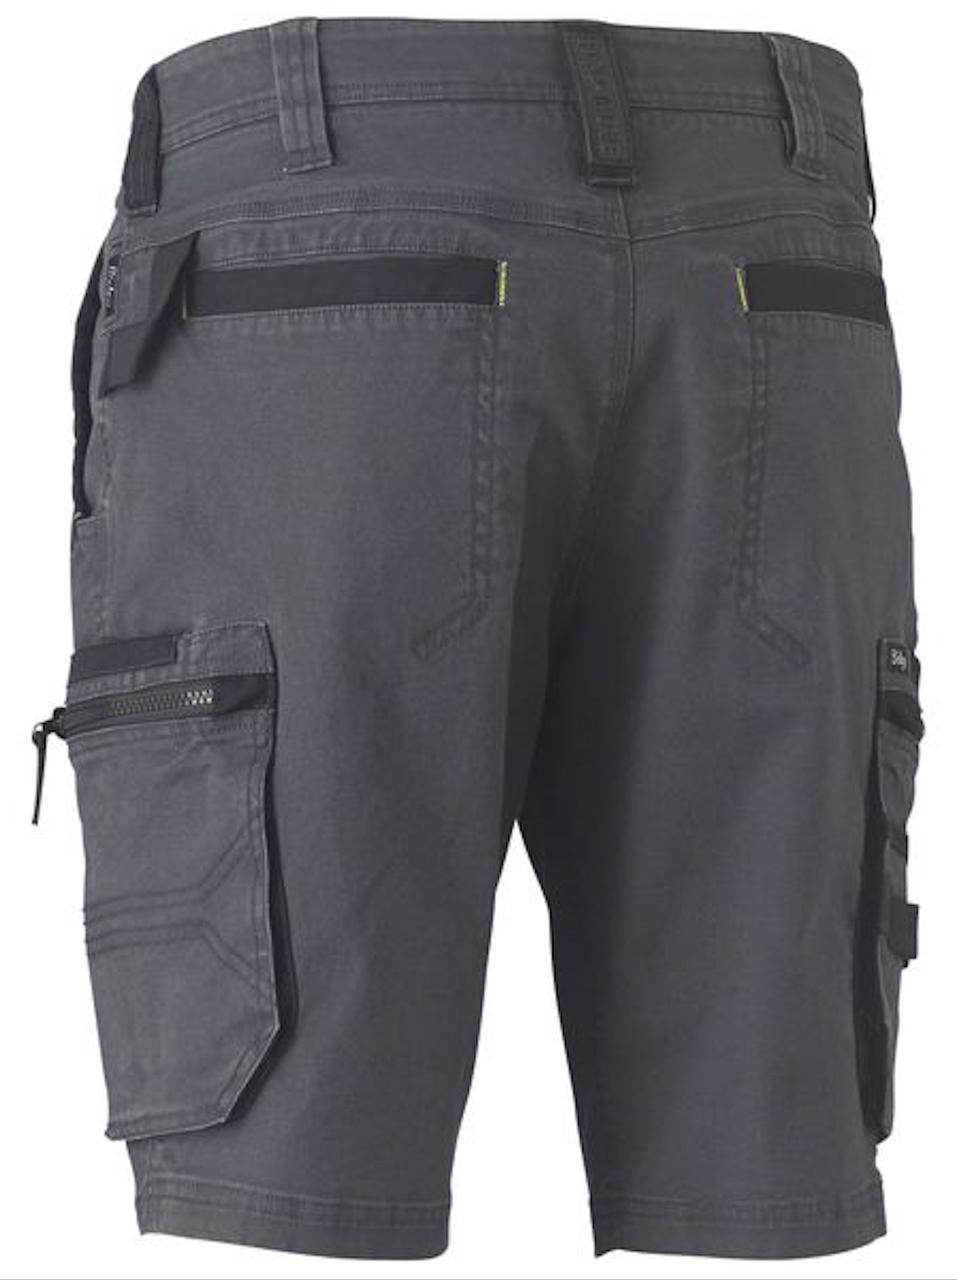 Bisley Uni Shorts Flex and Move Cargo Charcoal BSHC1330_BCCG